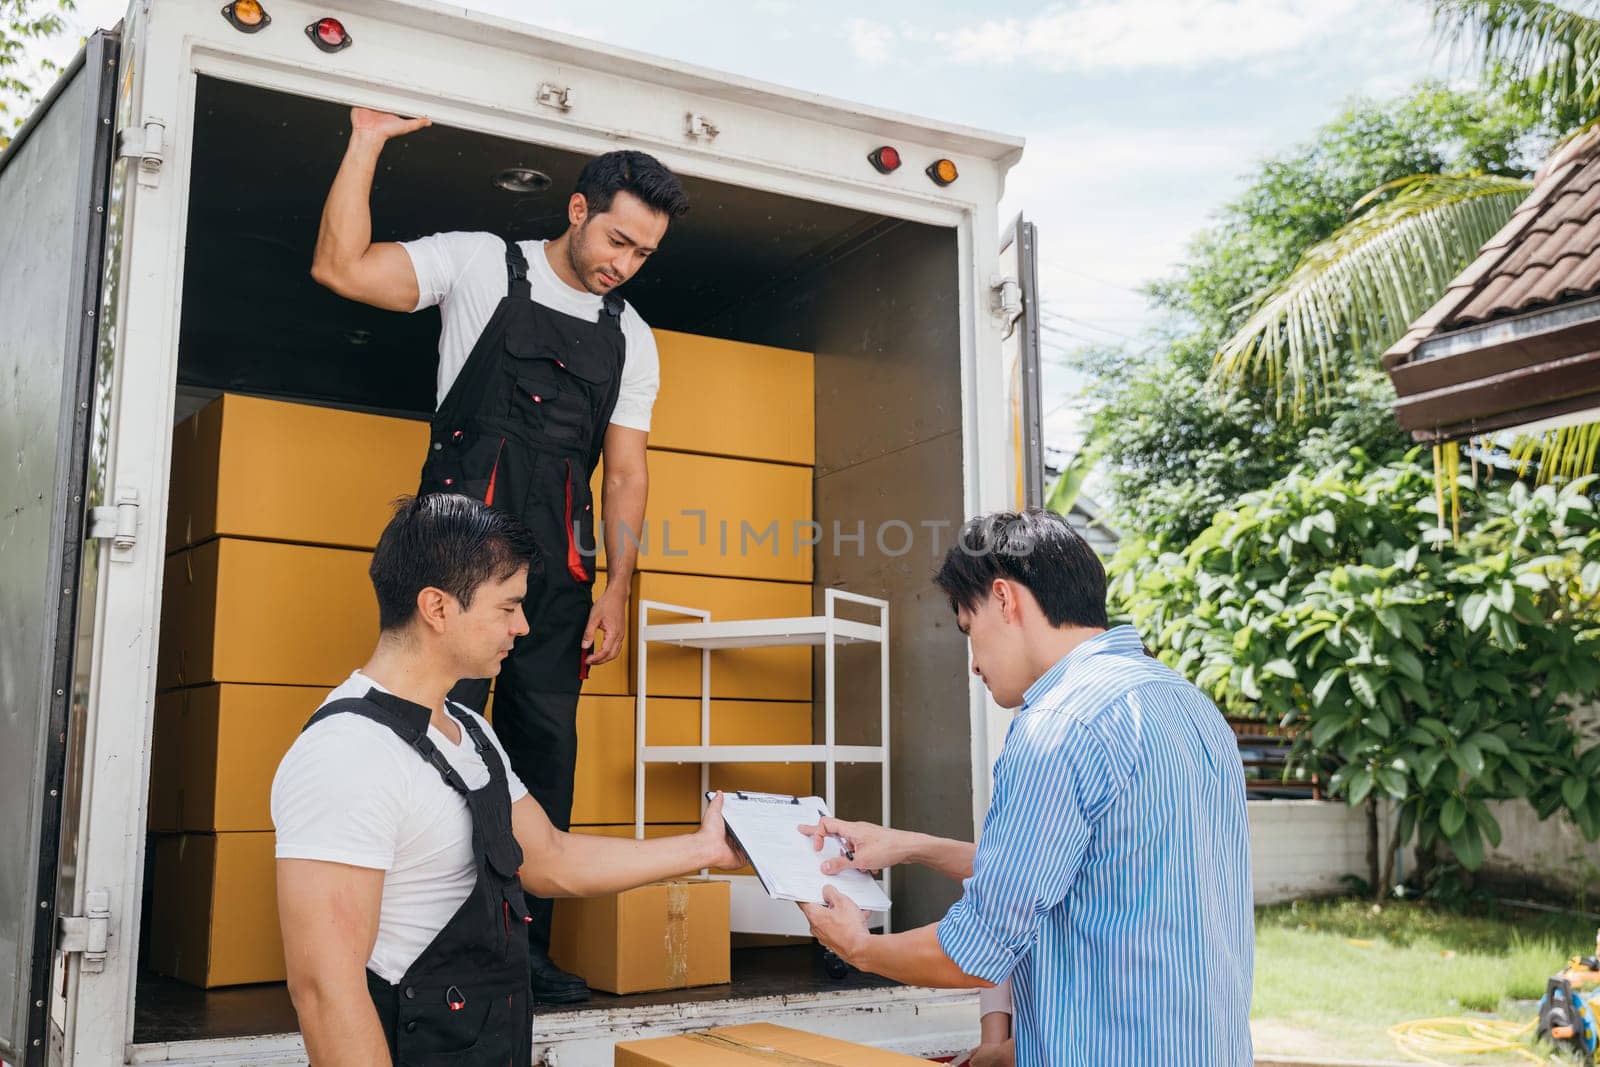 Professional movers assist a satisfied couple signing the delivery checklist after furniture lifting. Uniformed employees display teamwork for customer delight. Moving Day Concept